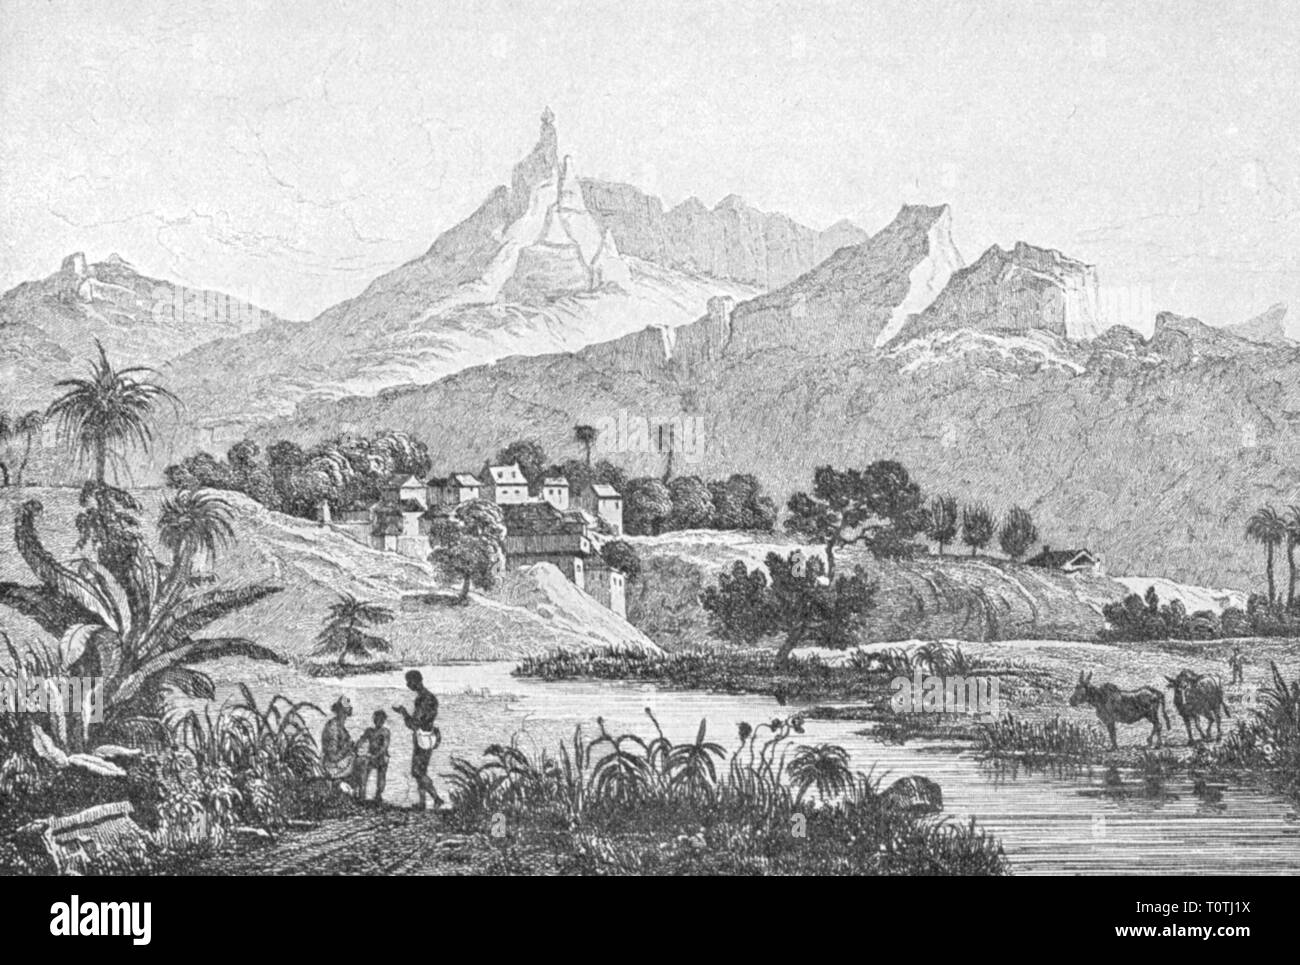 geography / travel historic, Mauritius, landscape, engraving by Bellence, 19th century, isle, islands, mounts, mount, mountains, mountain, river, rivers, village, villages, people, animals, animal, Great Britain, British colony, Mascarene Islands, Africa, landscape, landscapes, historic, historical, Additional-Rights-Clearance-Info-Not-Available Stock Photo